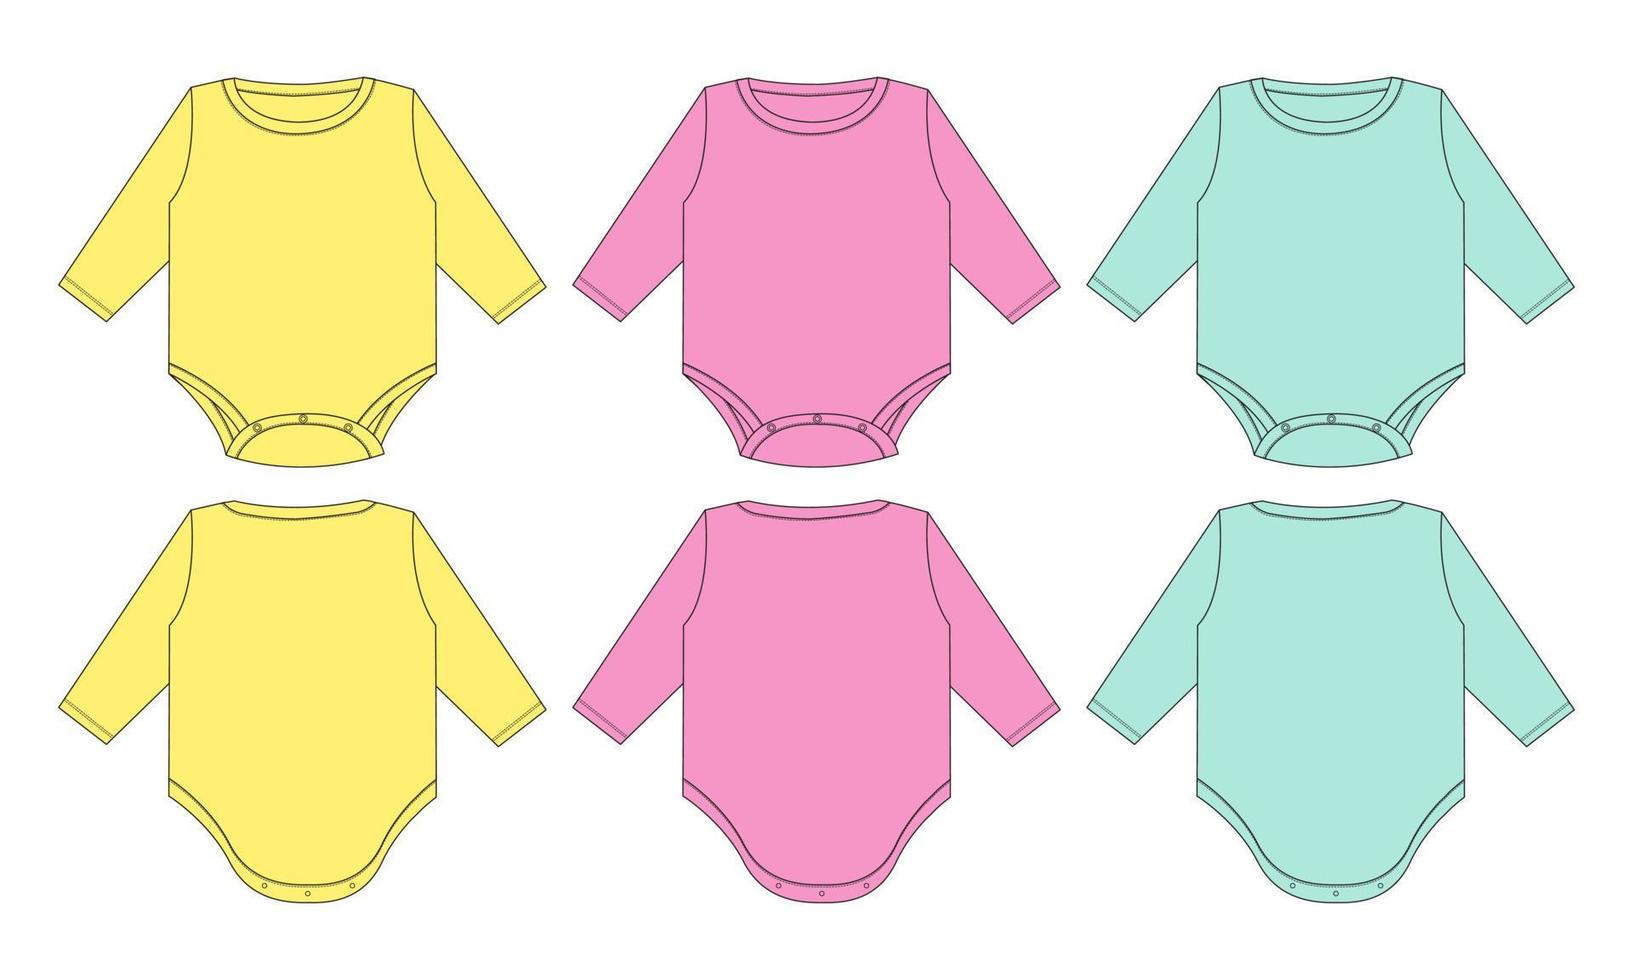 Multicolor Long Sleeve baby romper Overall technical fashion flat sketch drawing vector illustration template front and back view. Apparel Clothes design Mock up for baby girl. Kids Dress Design.